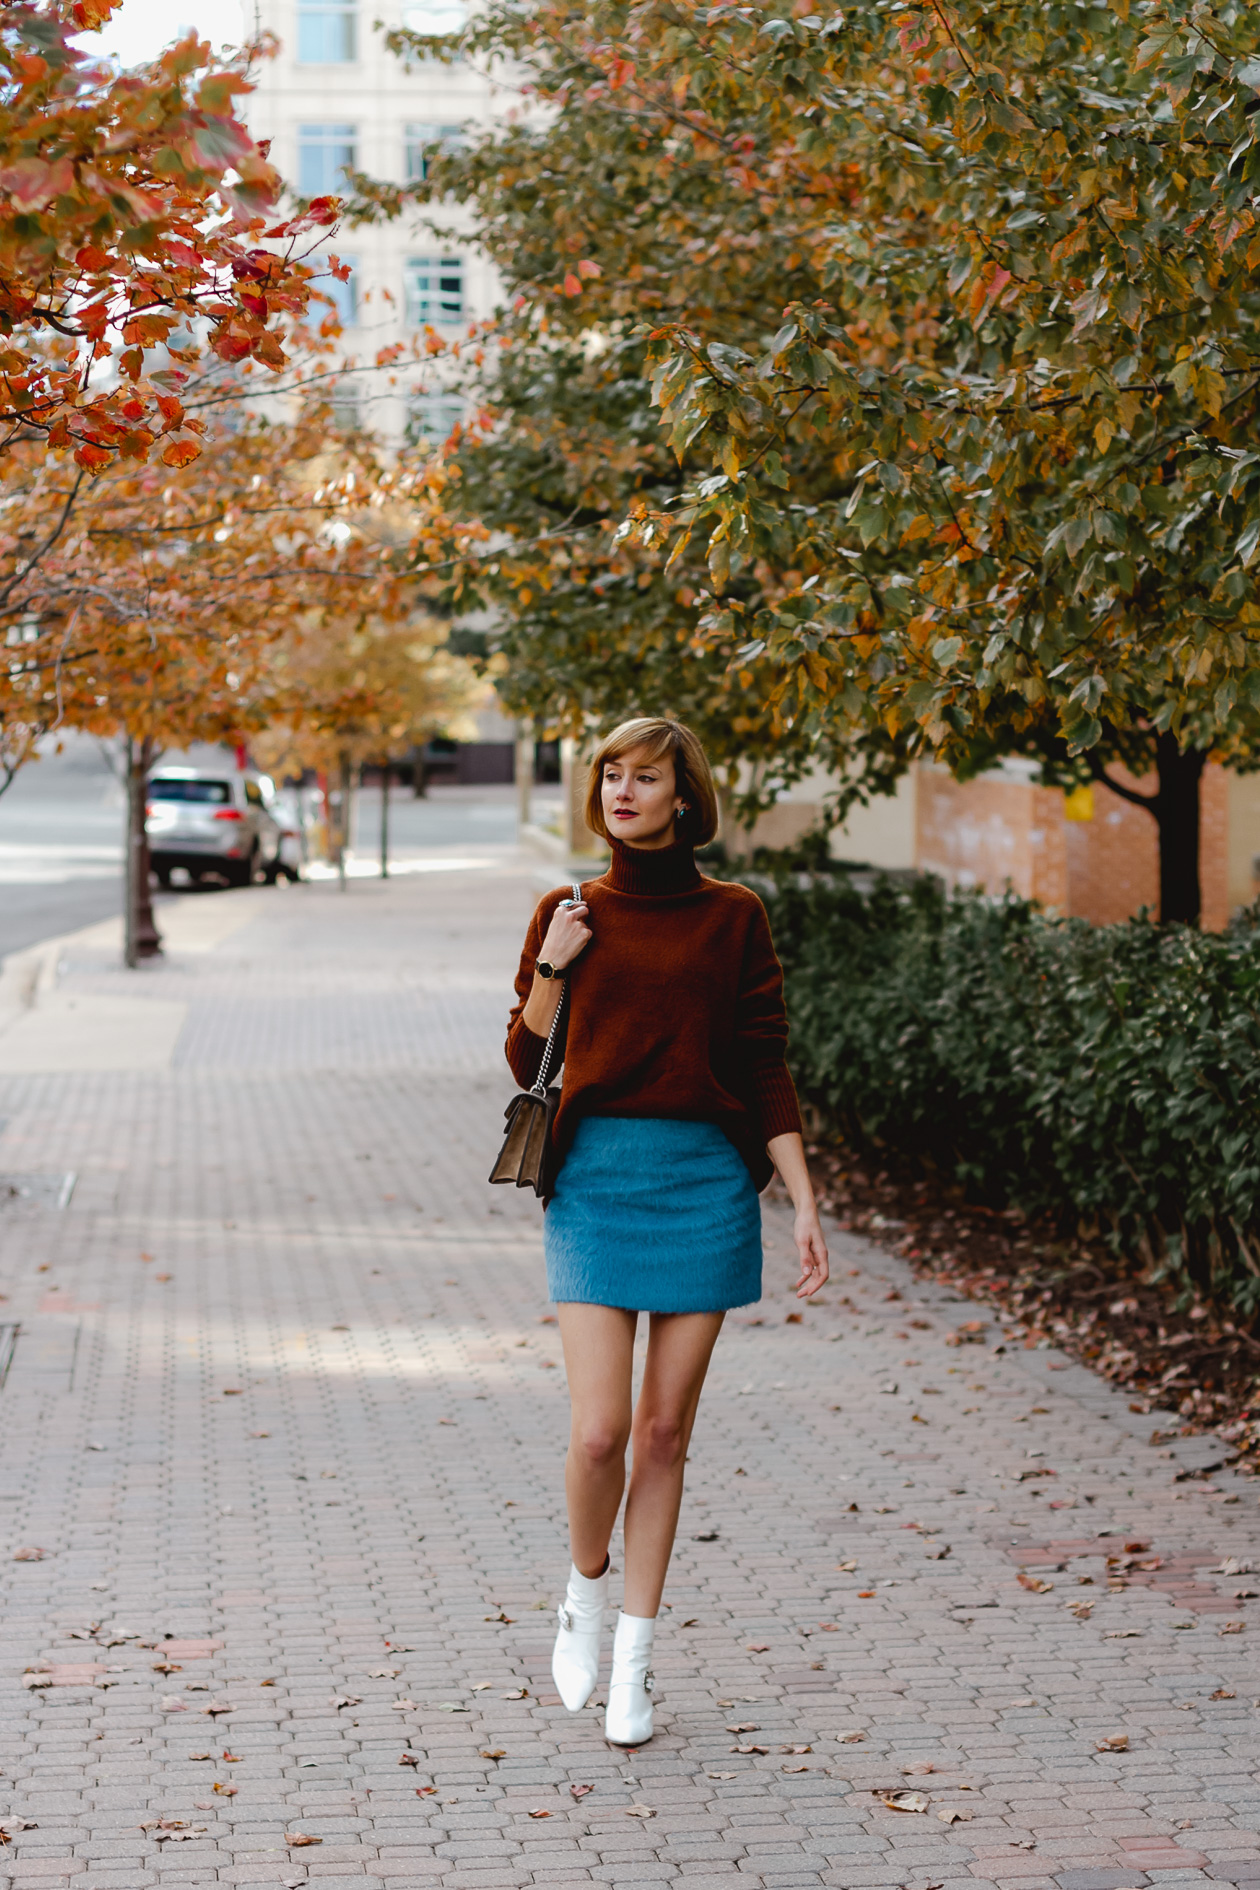 & Other Stories sweater and mini skirt